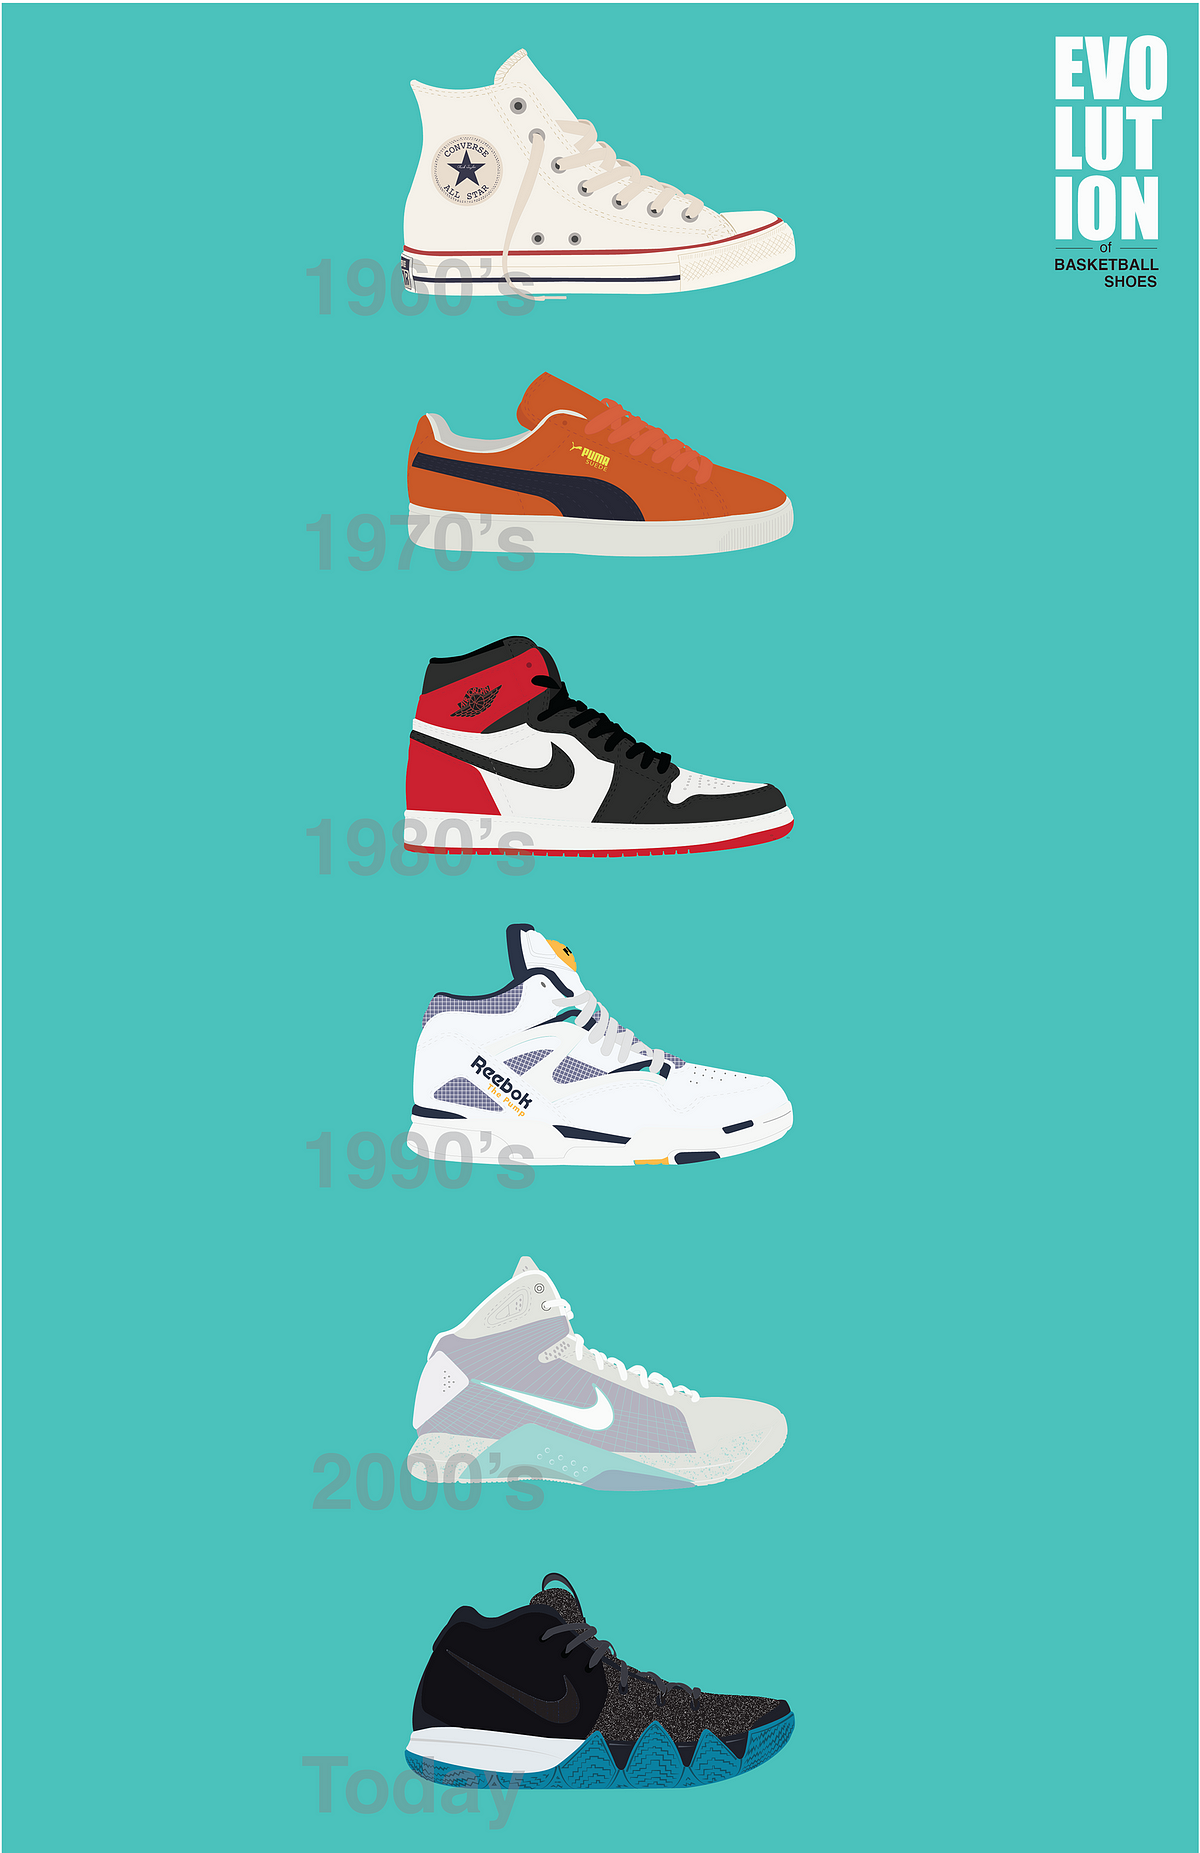 The Evolution of Basketball Shoes | by Slam Dunk | Medium